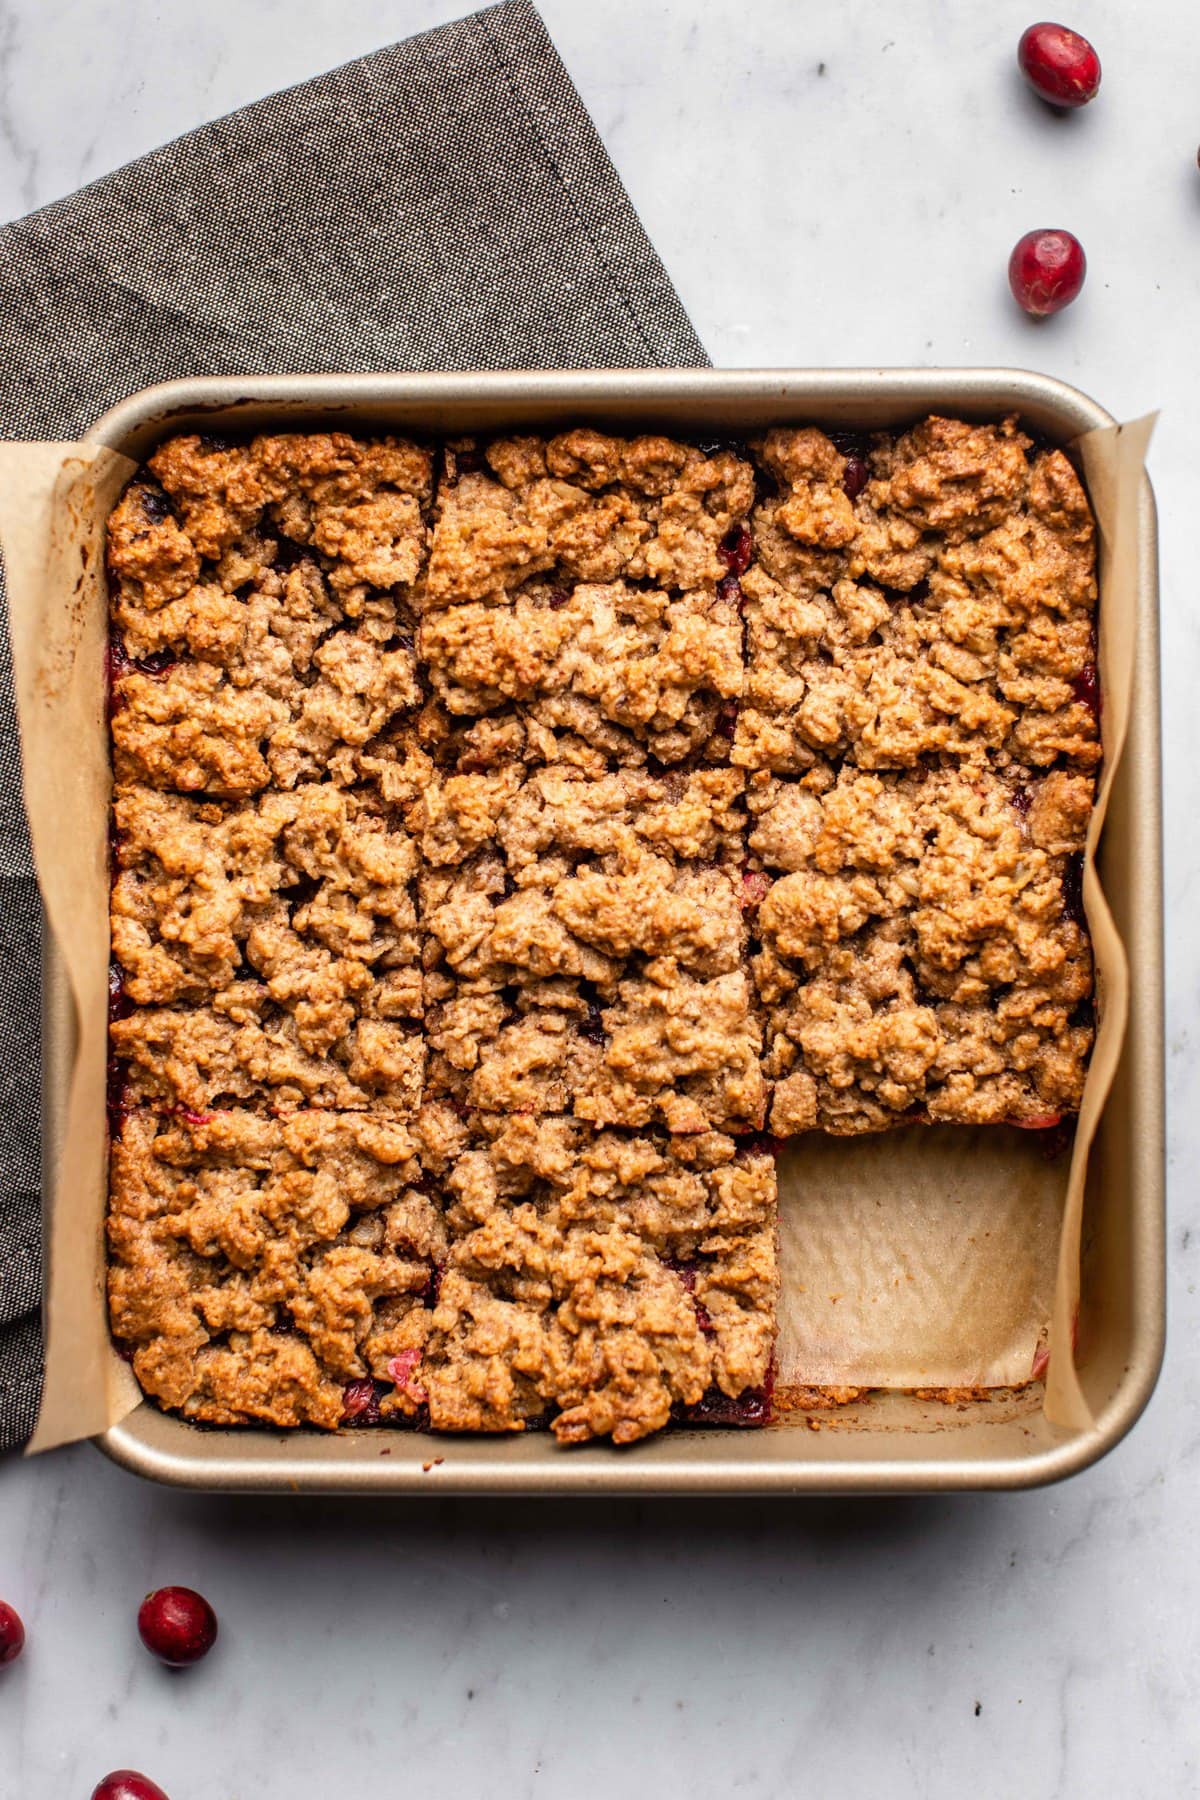 cooked cranberry orange crumble bars in gold baking pan sliced into 9 pieces with one slice taken out